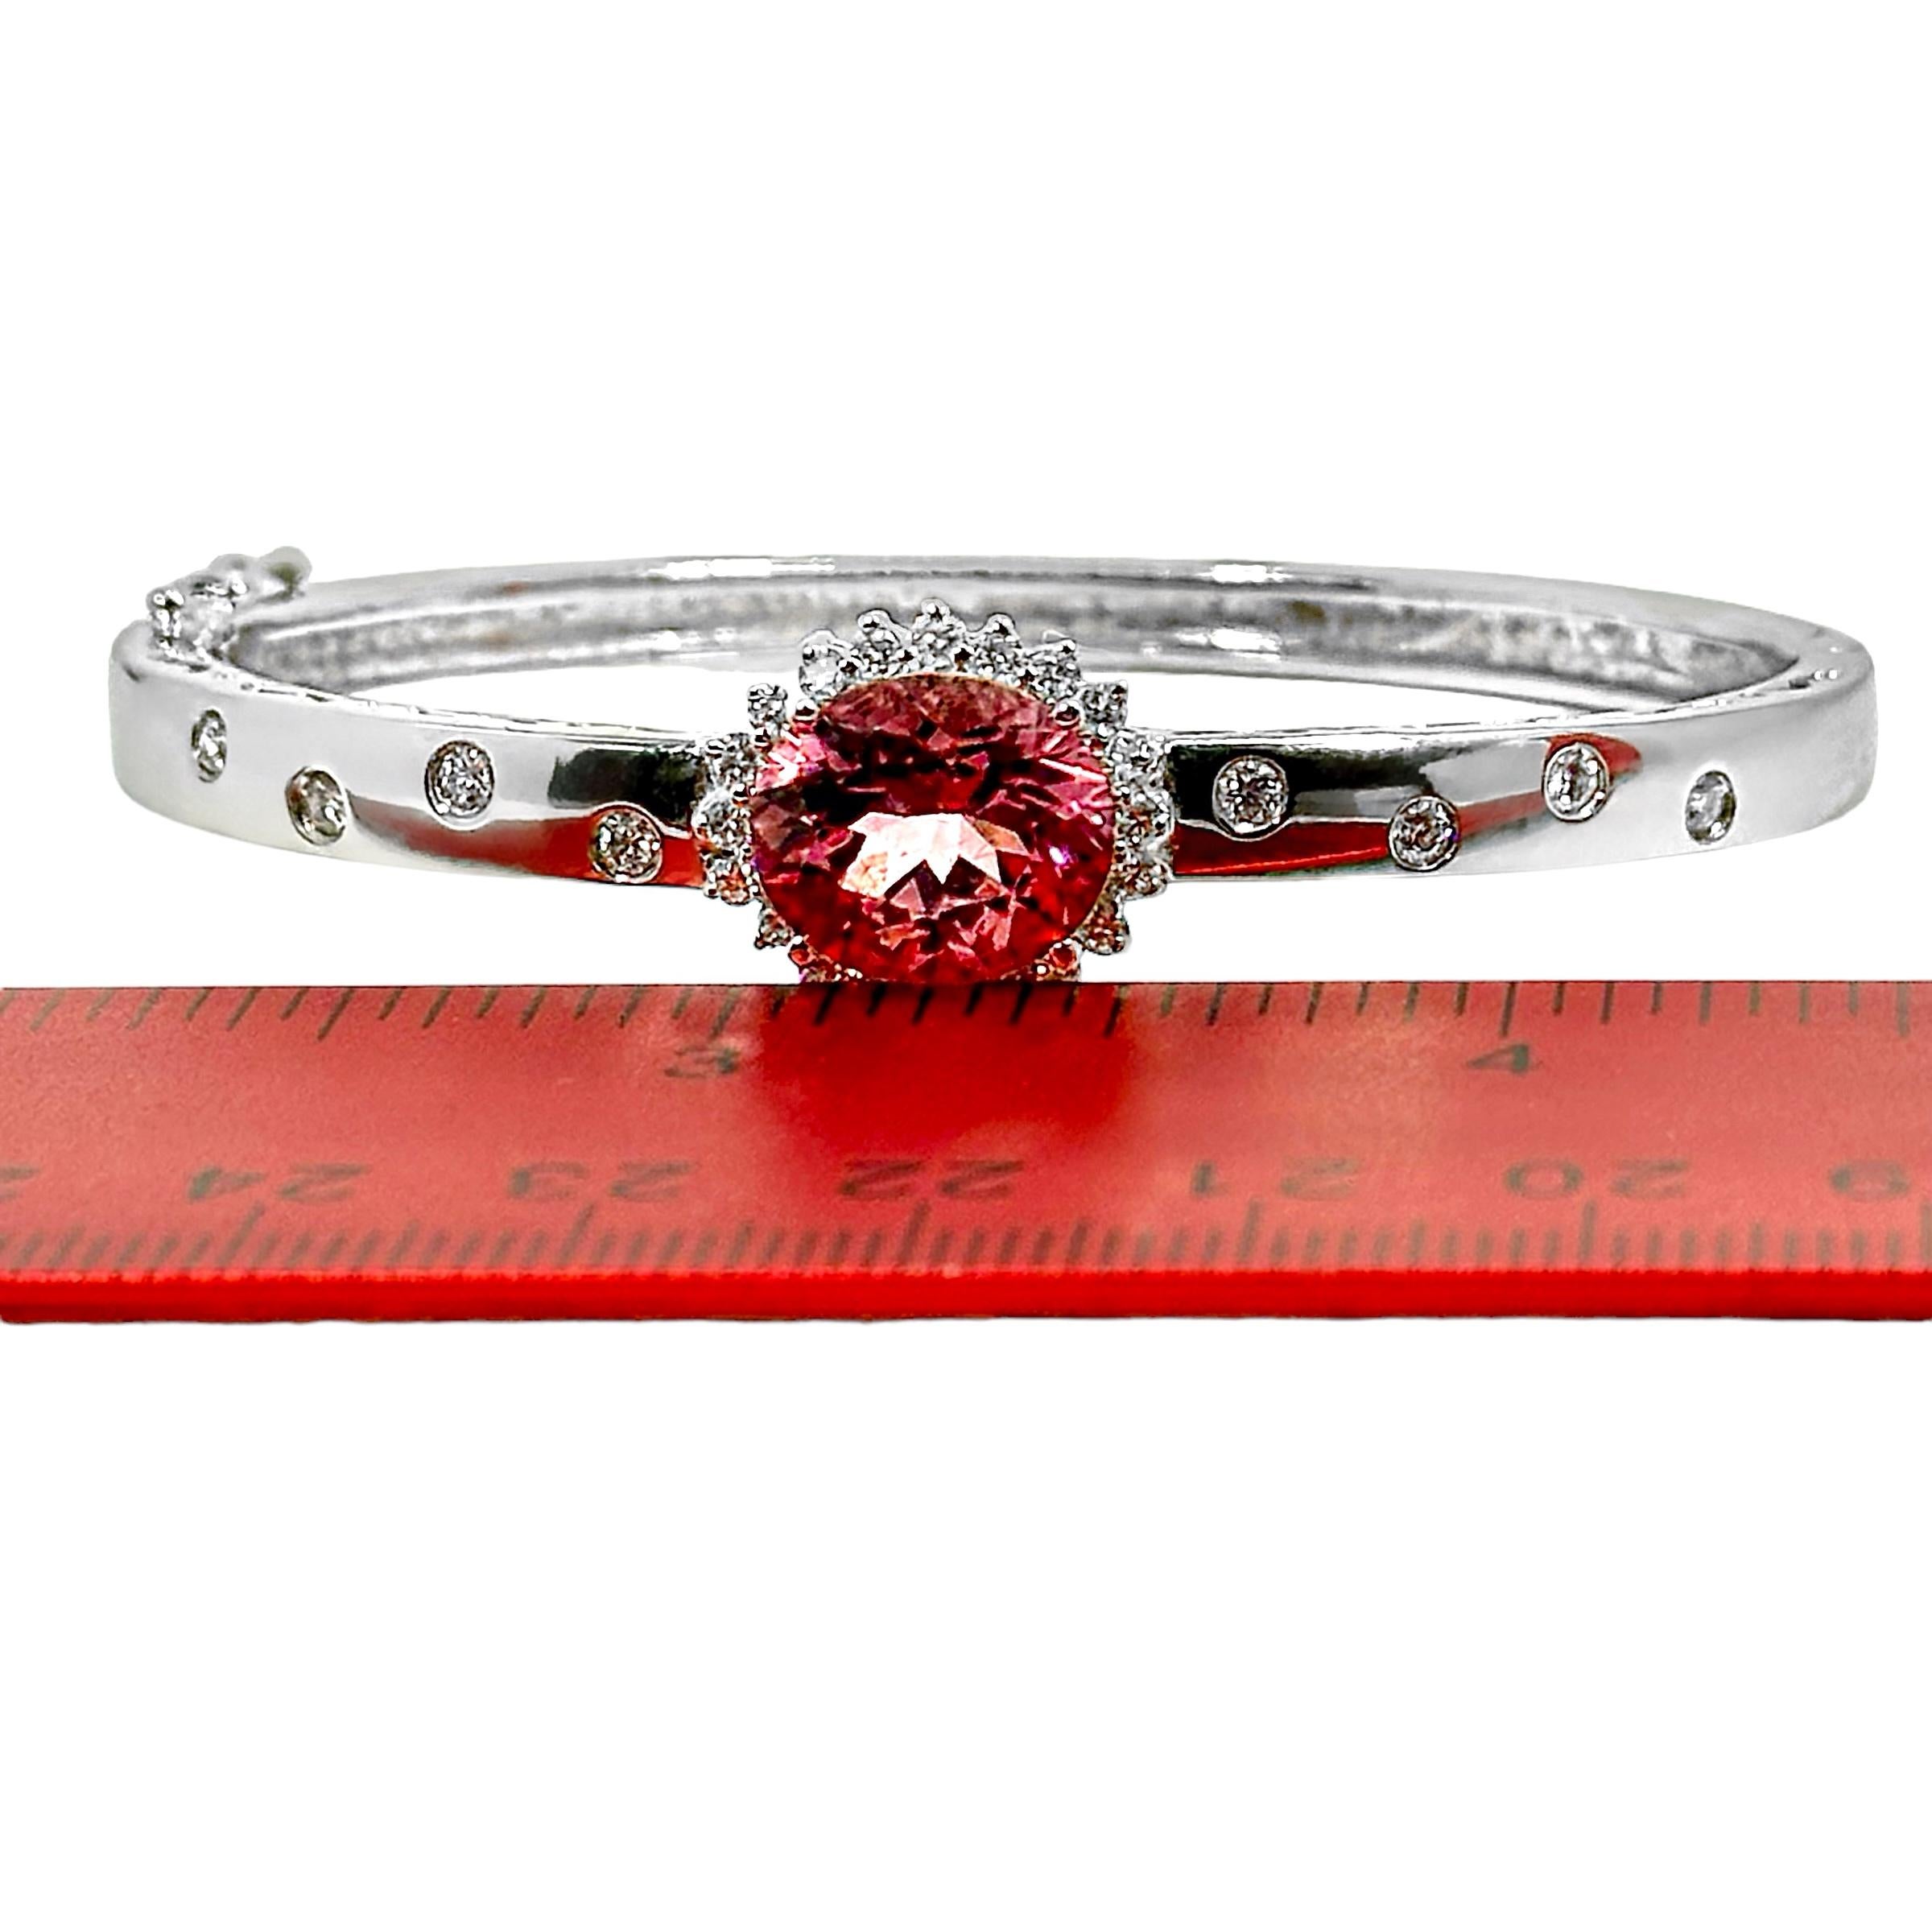 White Gold Bangle Bracelet with 4.27ct Oval Pink Tourmaline and Diamond Halo For Sale 2